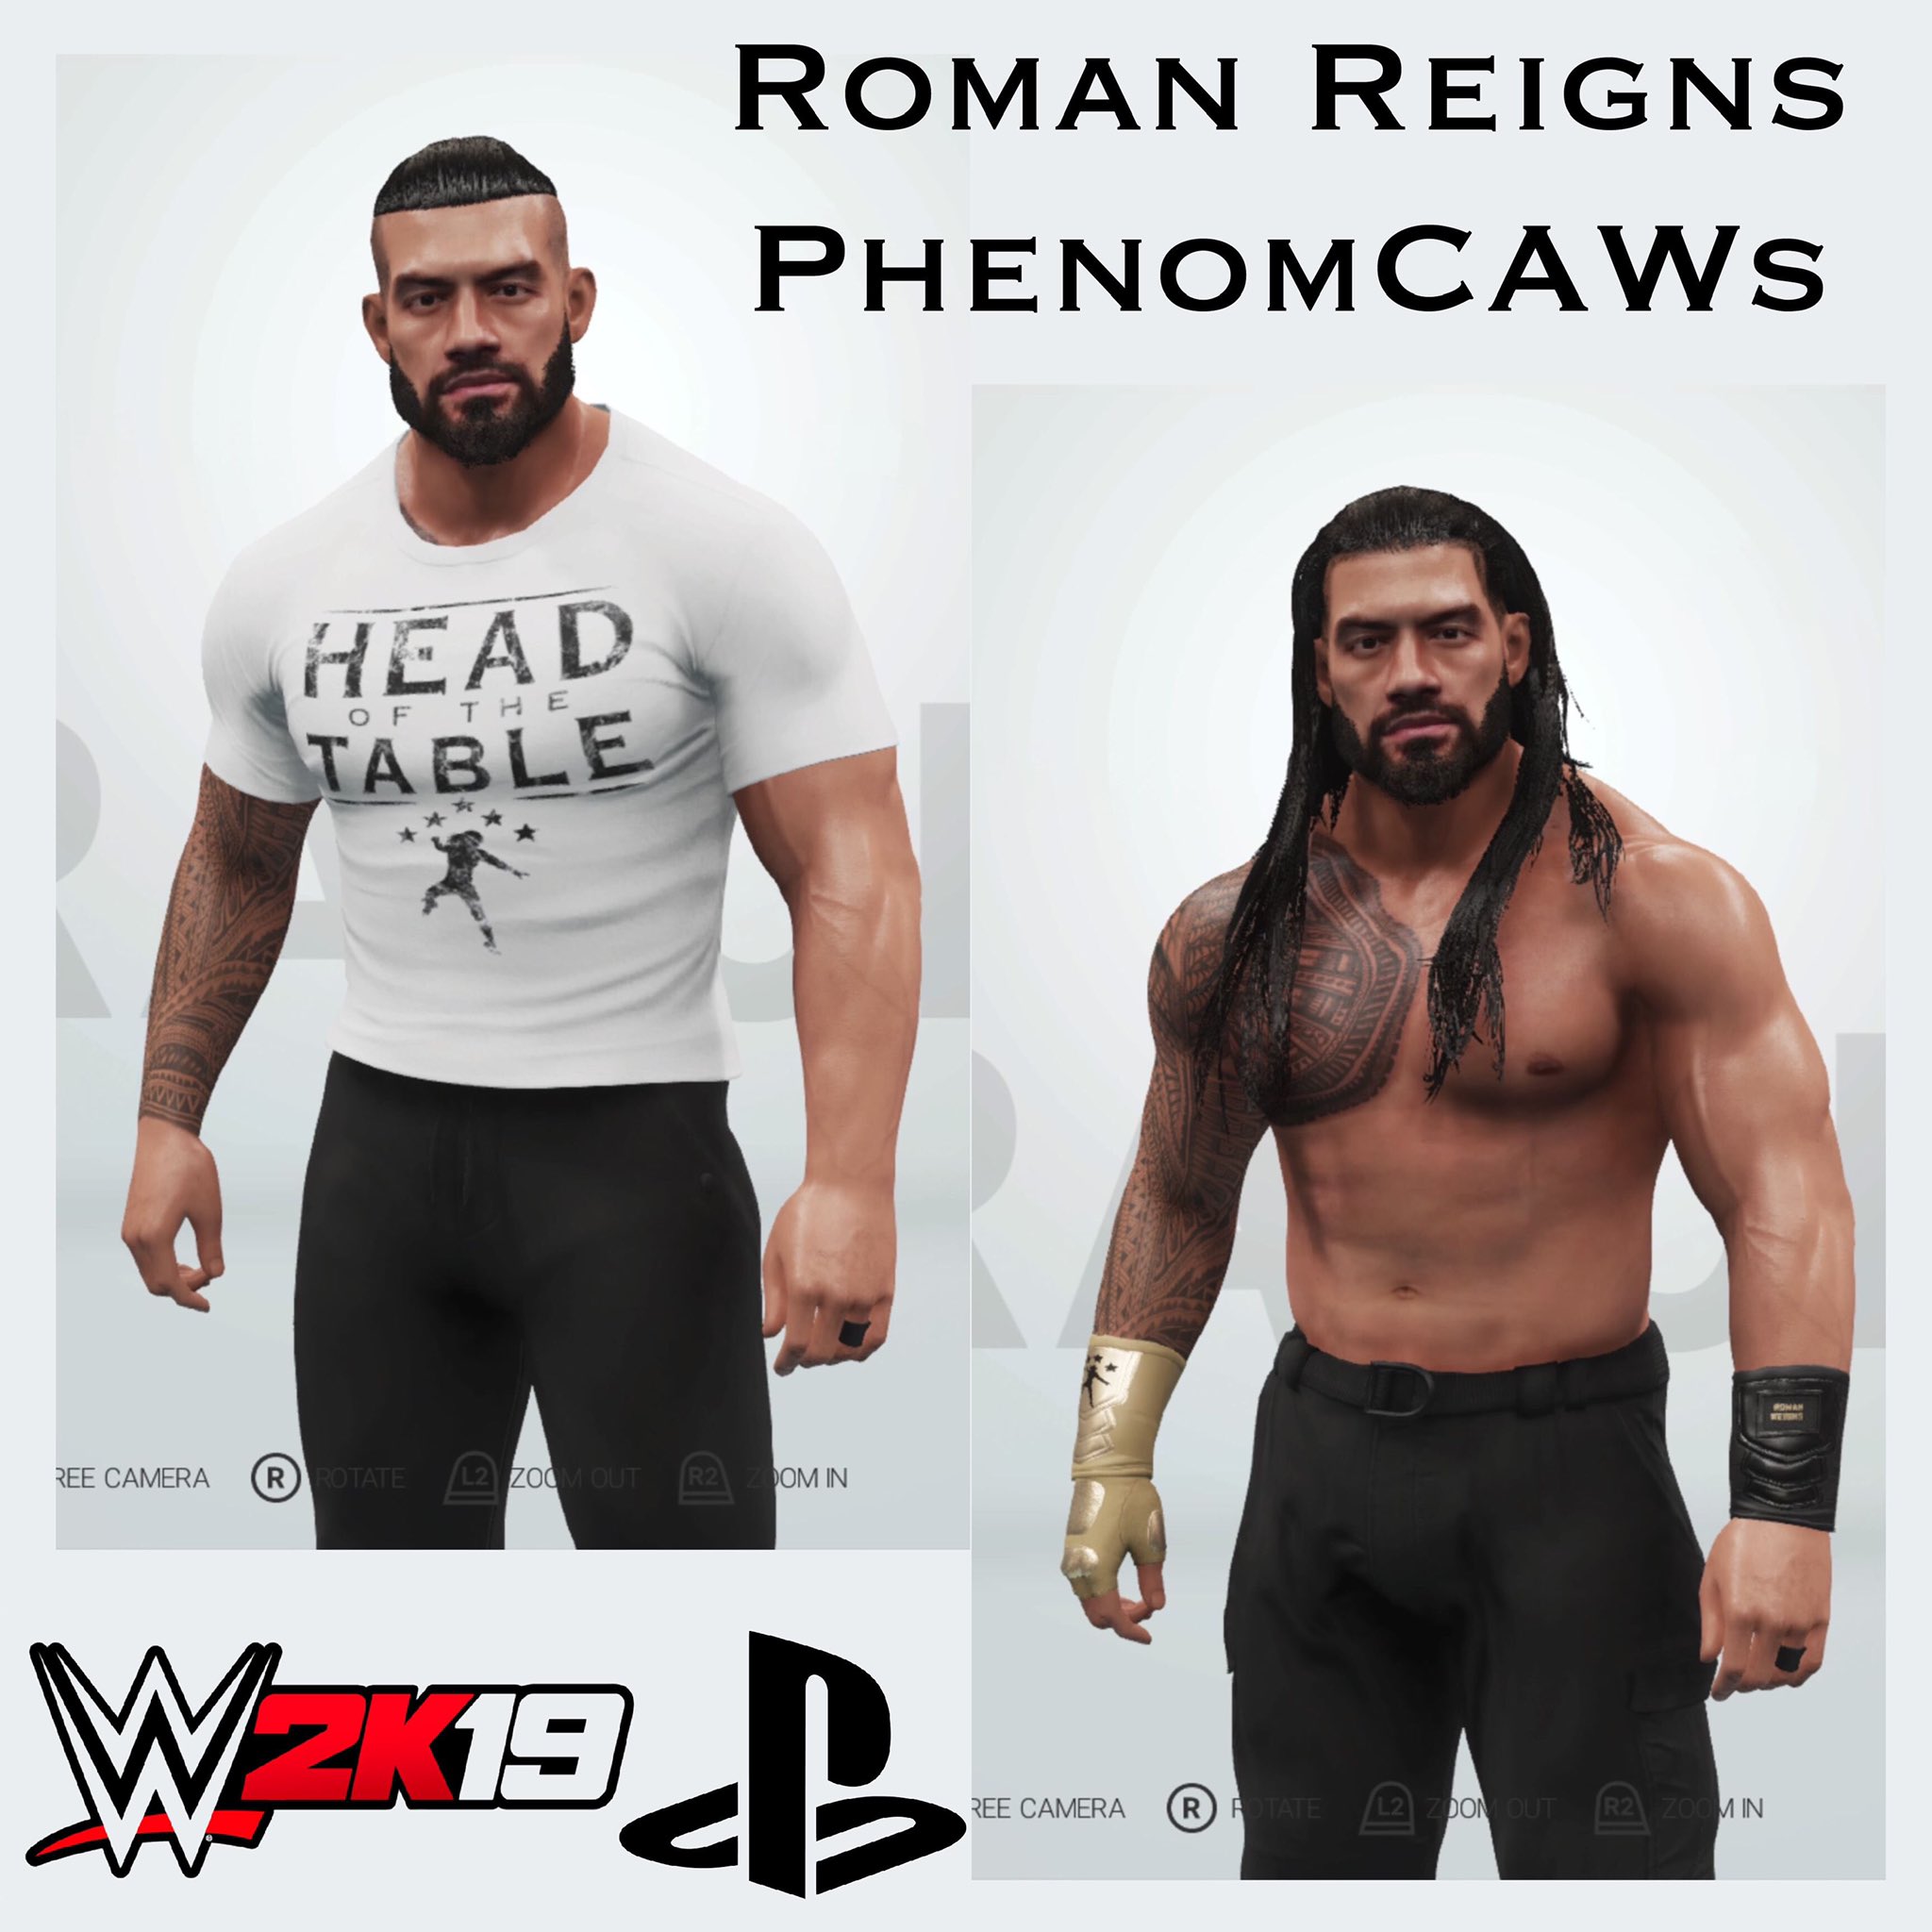 Roman reigns and wwe pictures pt.2 - tattoo and Muscles 💪 - Wattpad